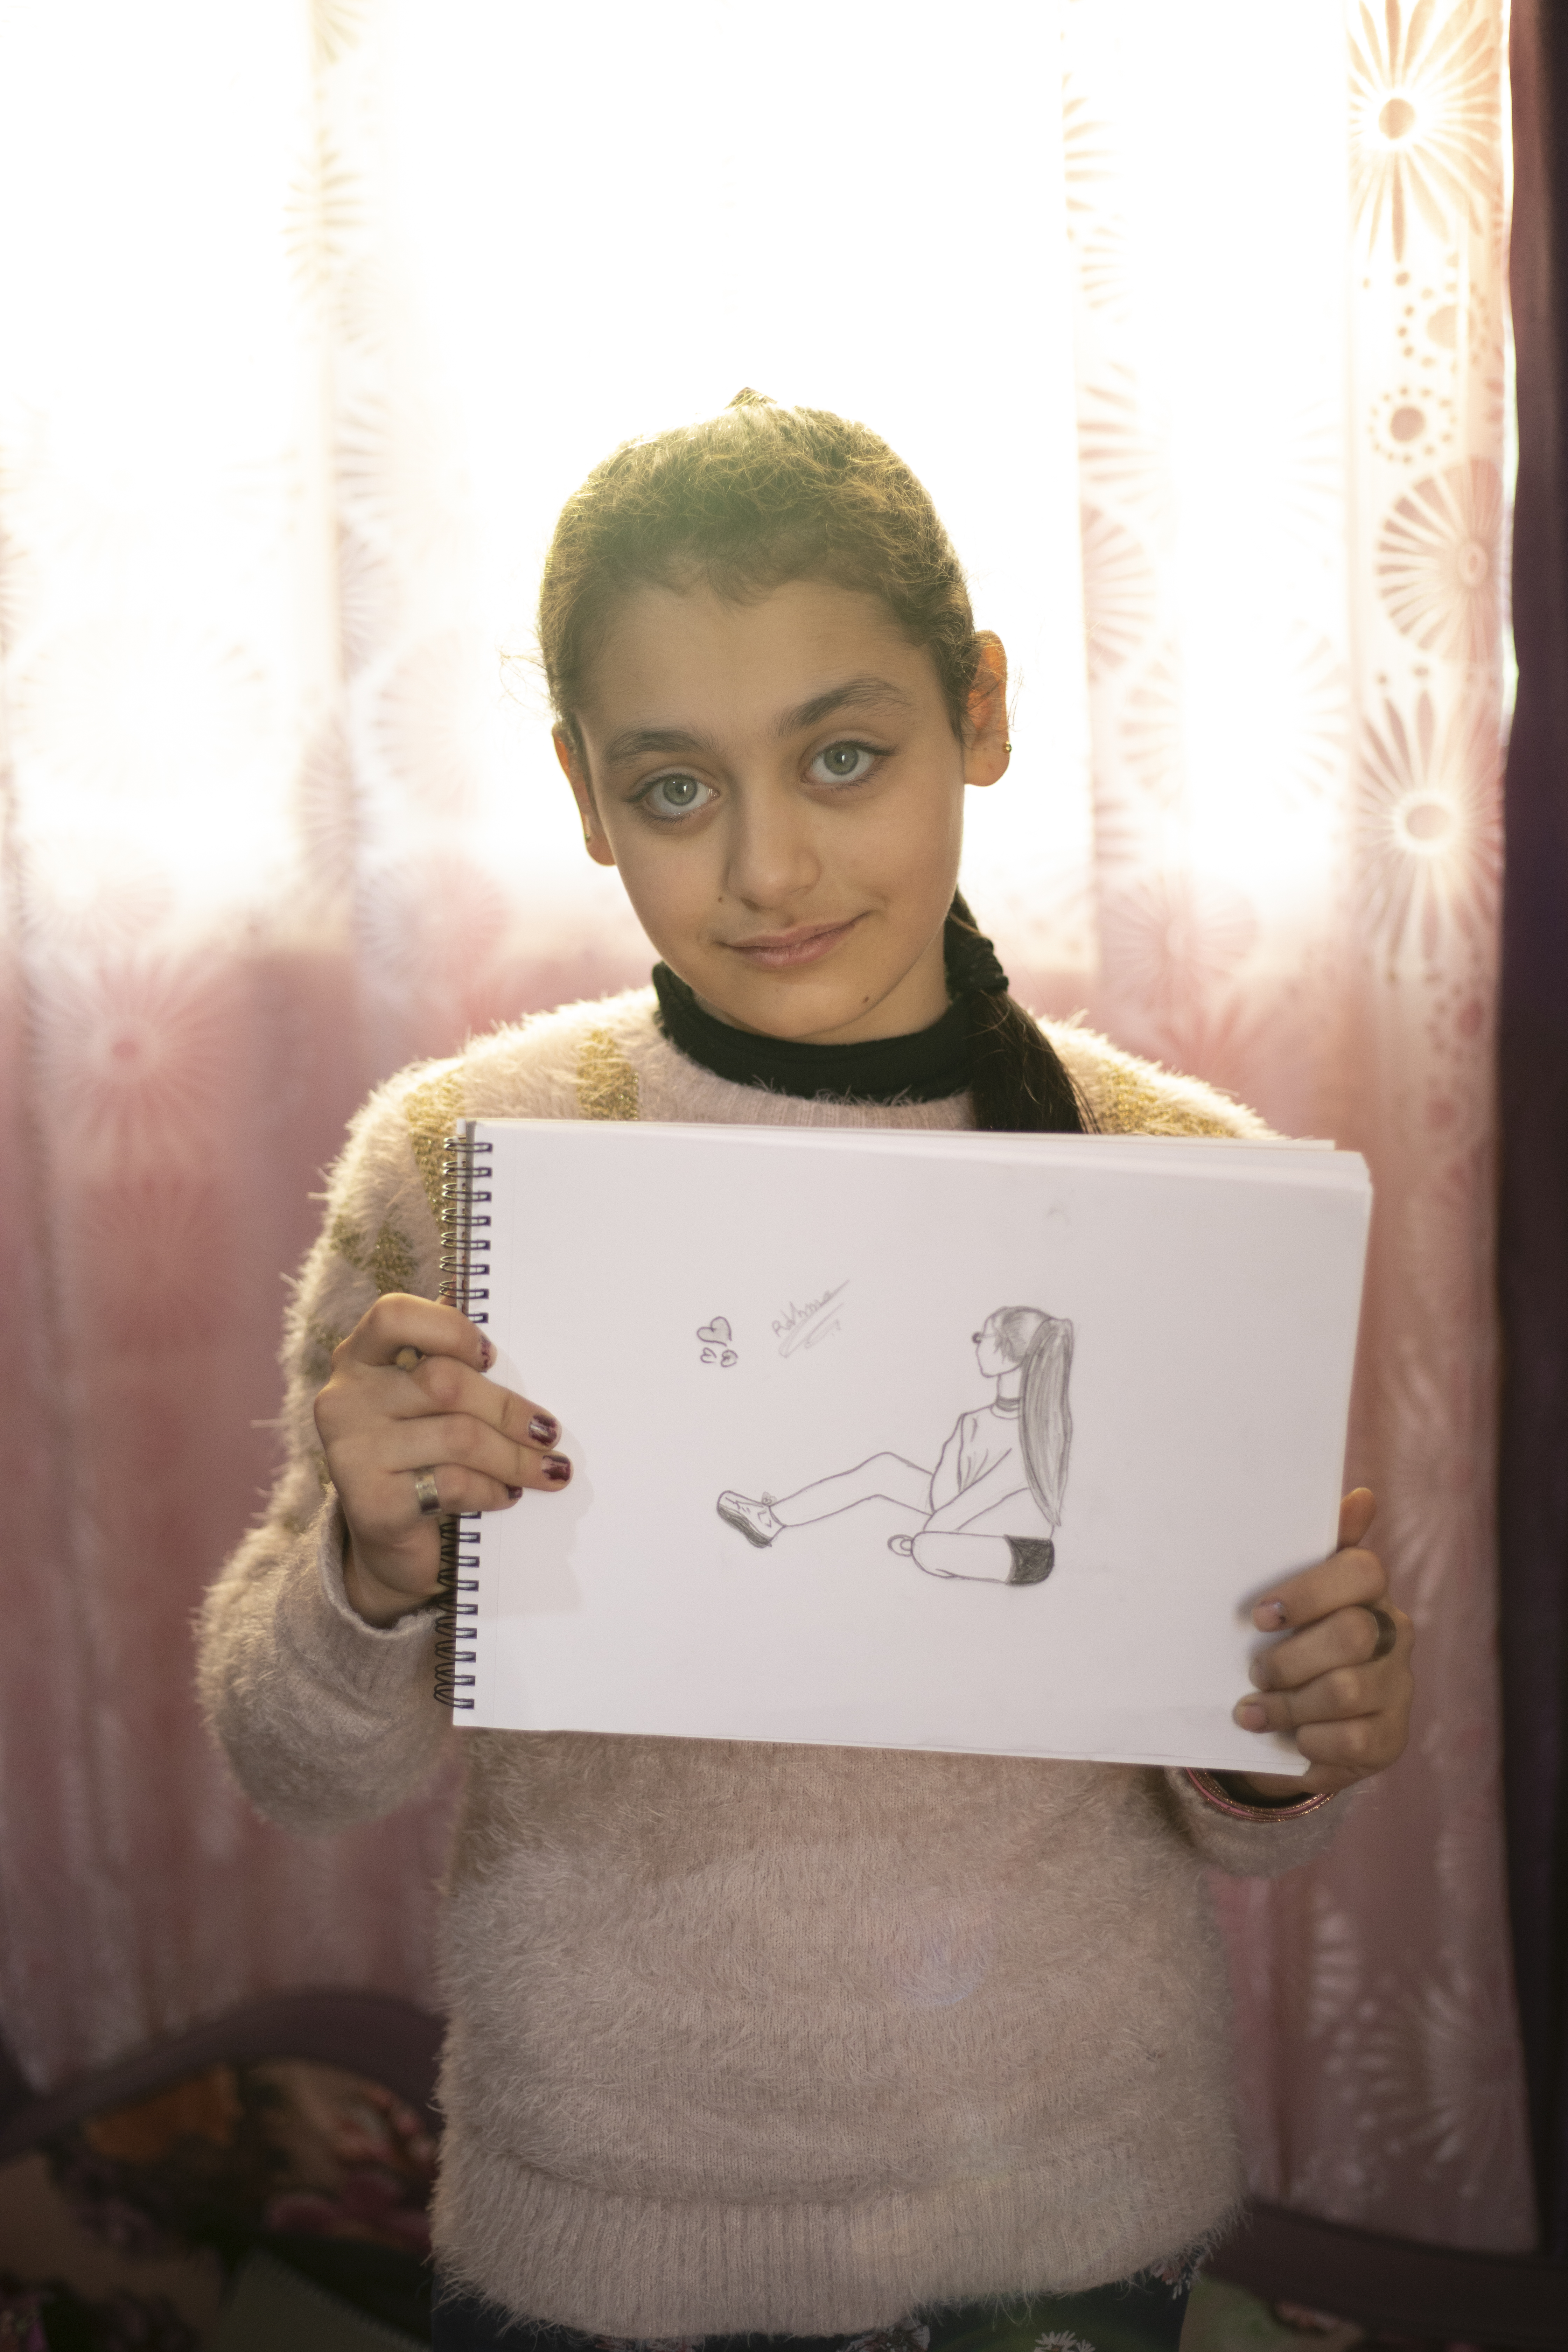 A young girl from Syria, standing indoors, holding one of her drawings featuring a women.